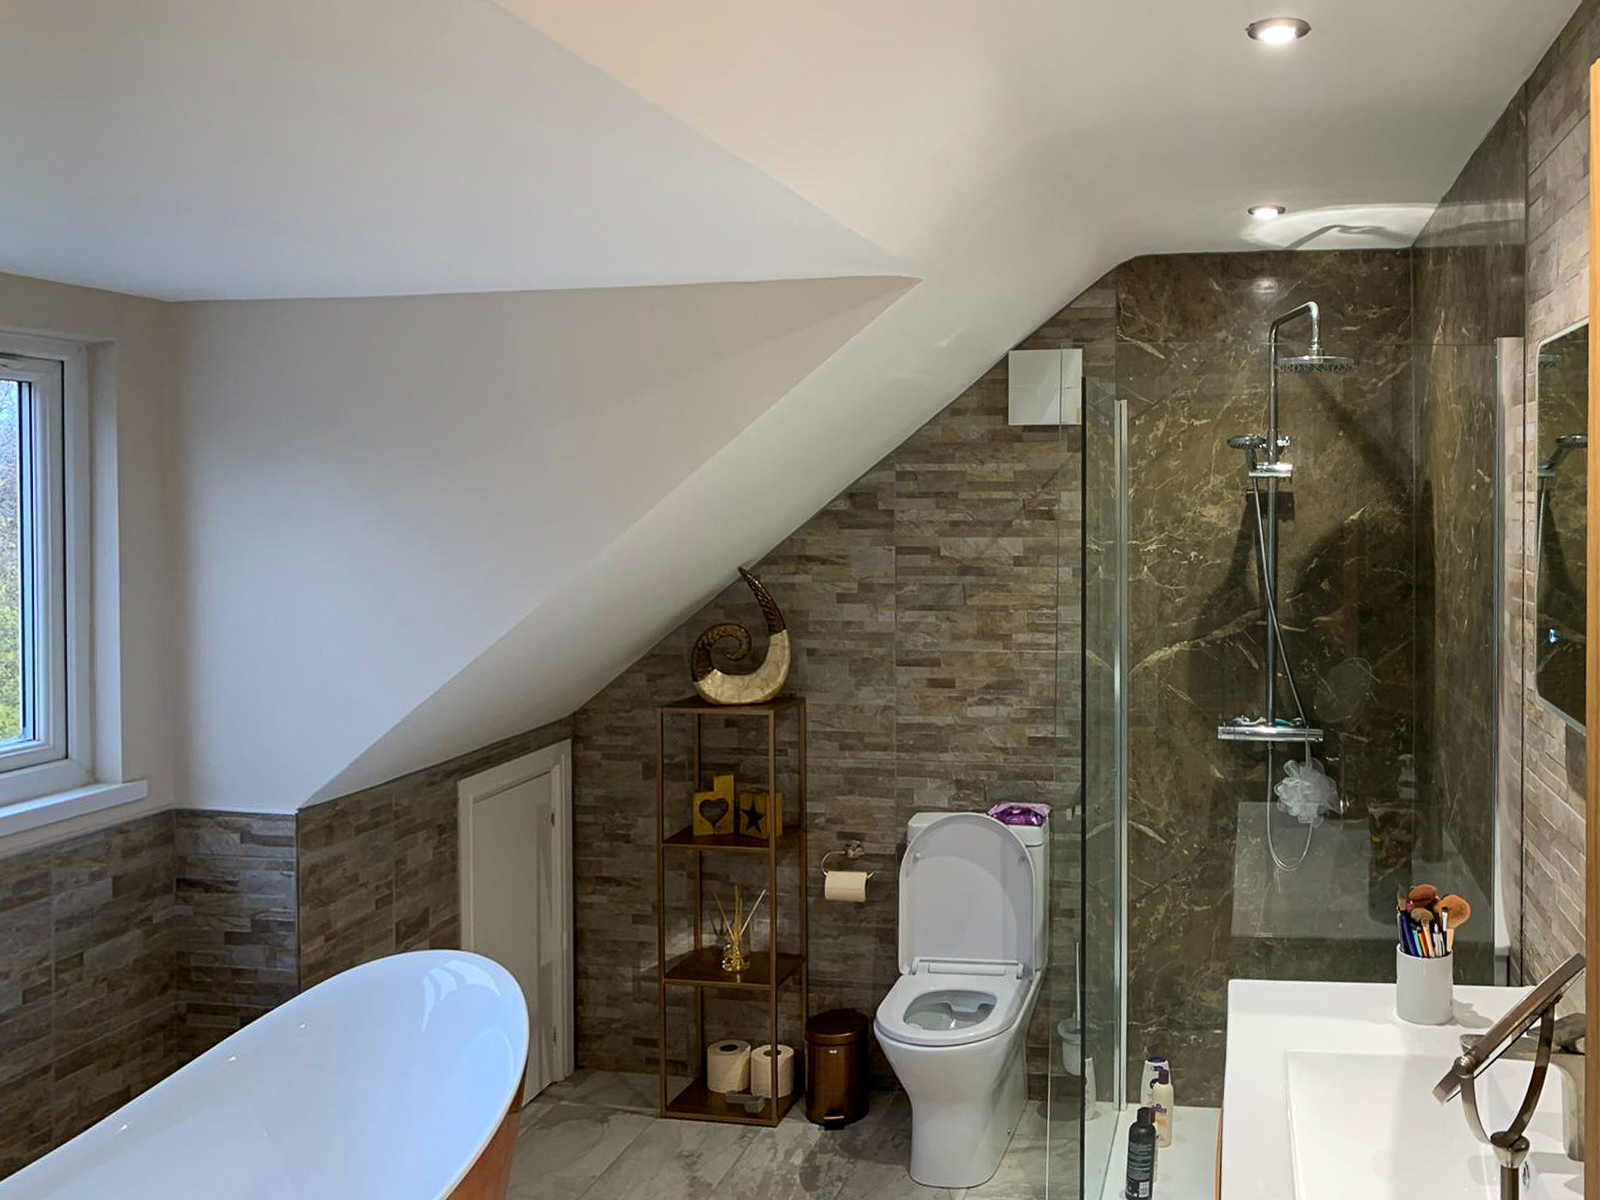 bathroom and sloping ceiling in bathroom of double extension